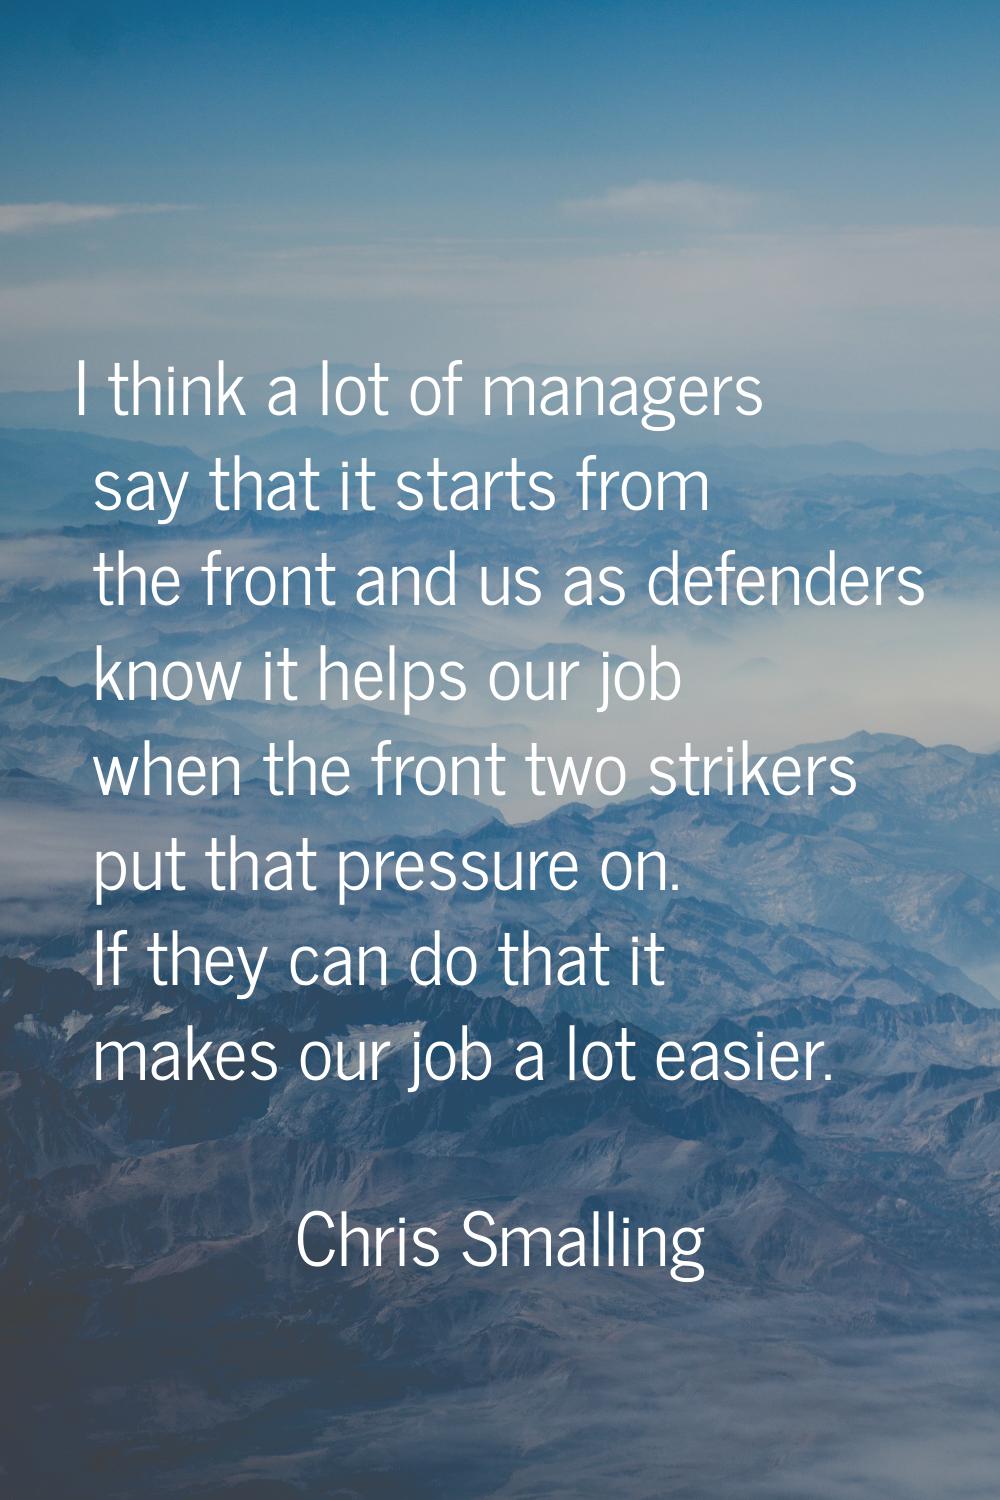 I think a lot of managers say that it starts from the front and us as defenders know it helps our j